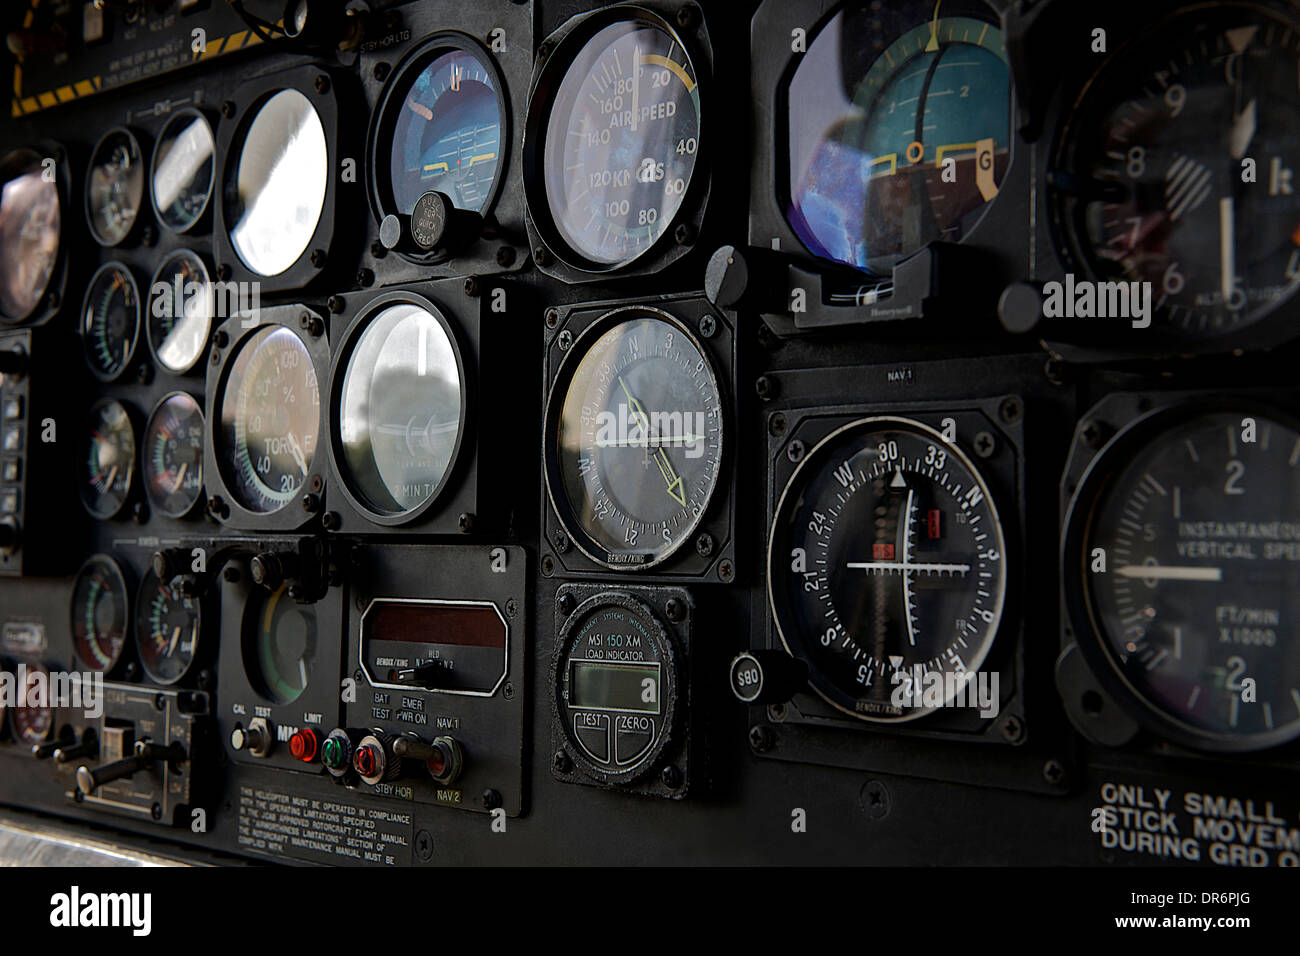 Dash board of helicopter Stock Photo